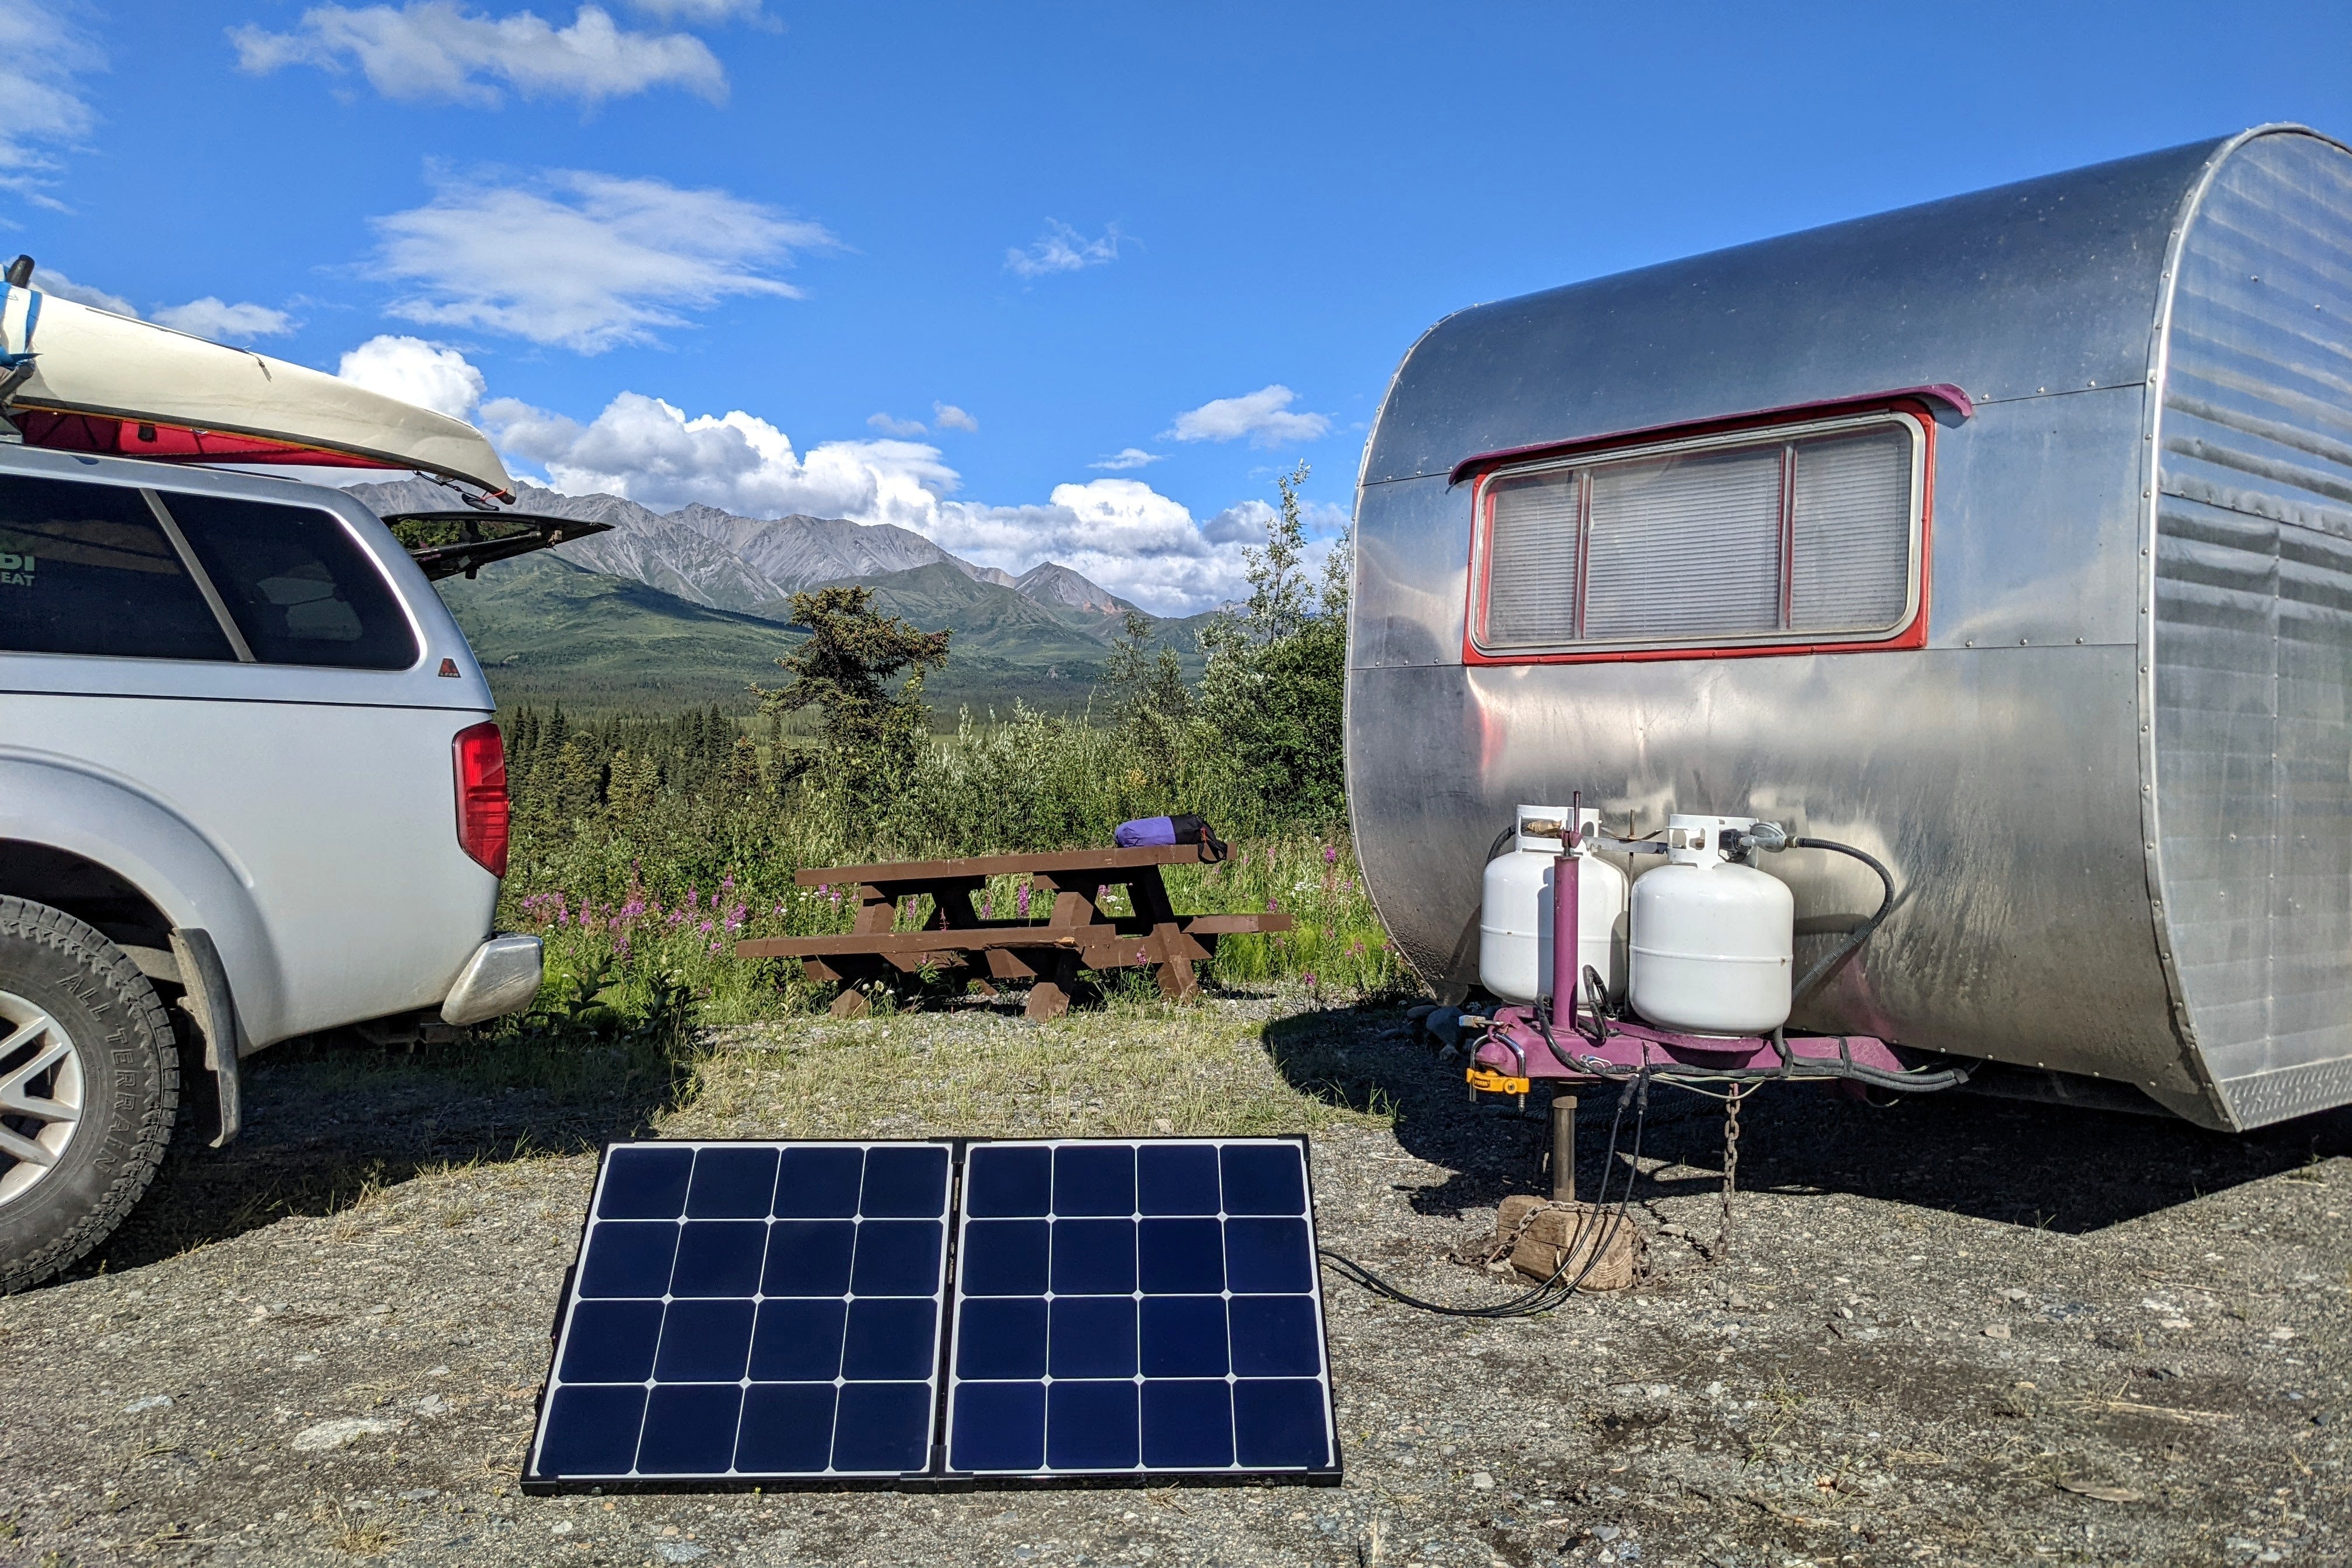 Camper submitted image from Nabesna Road Wrangell St. Elias National Park - 2